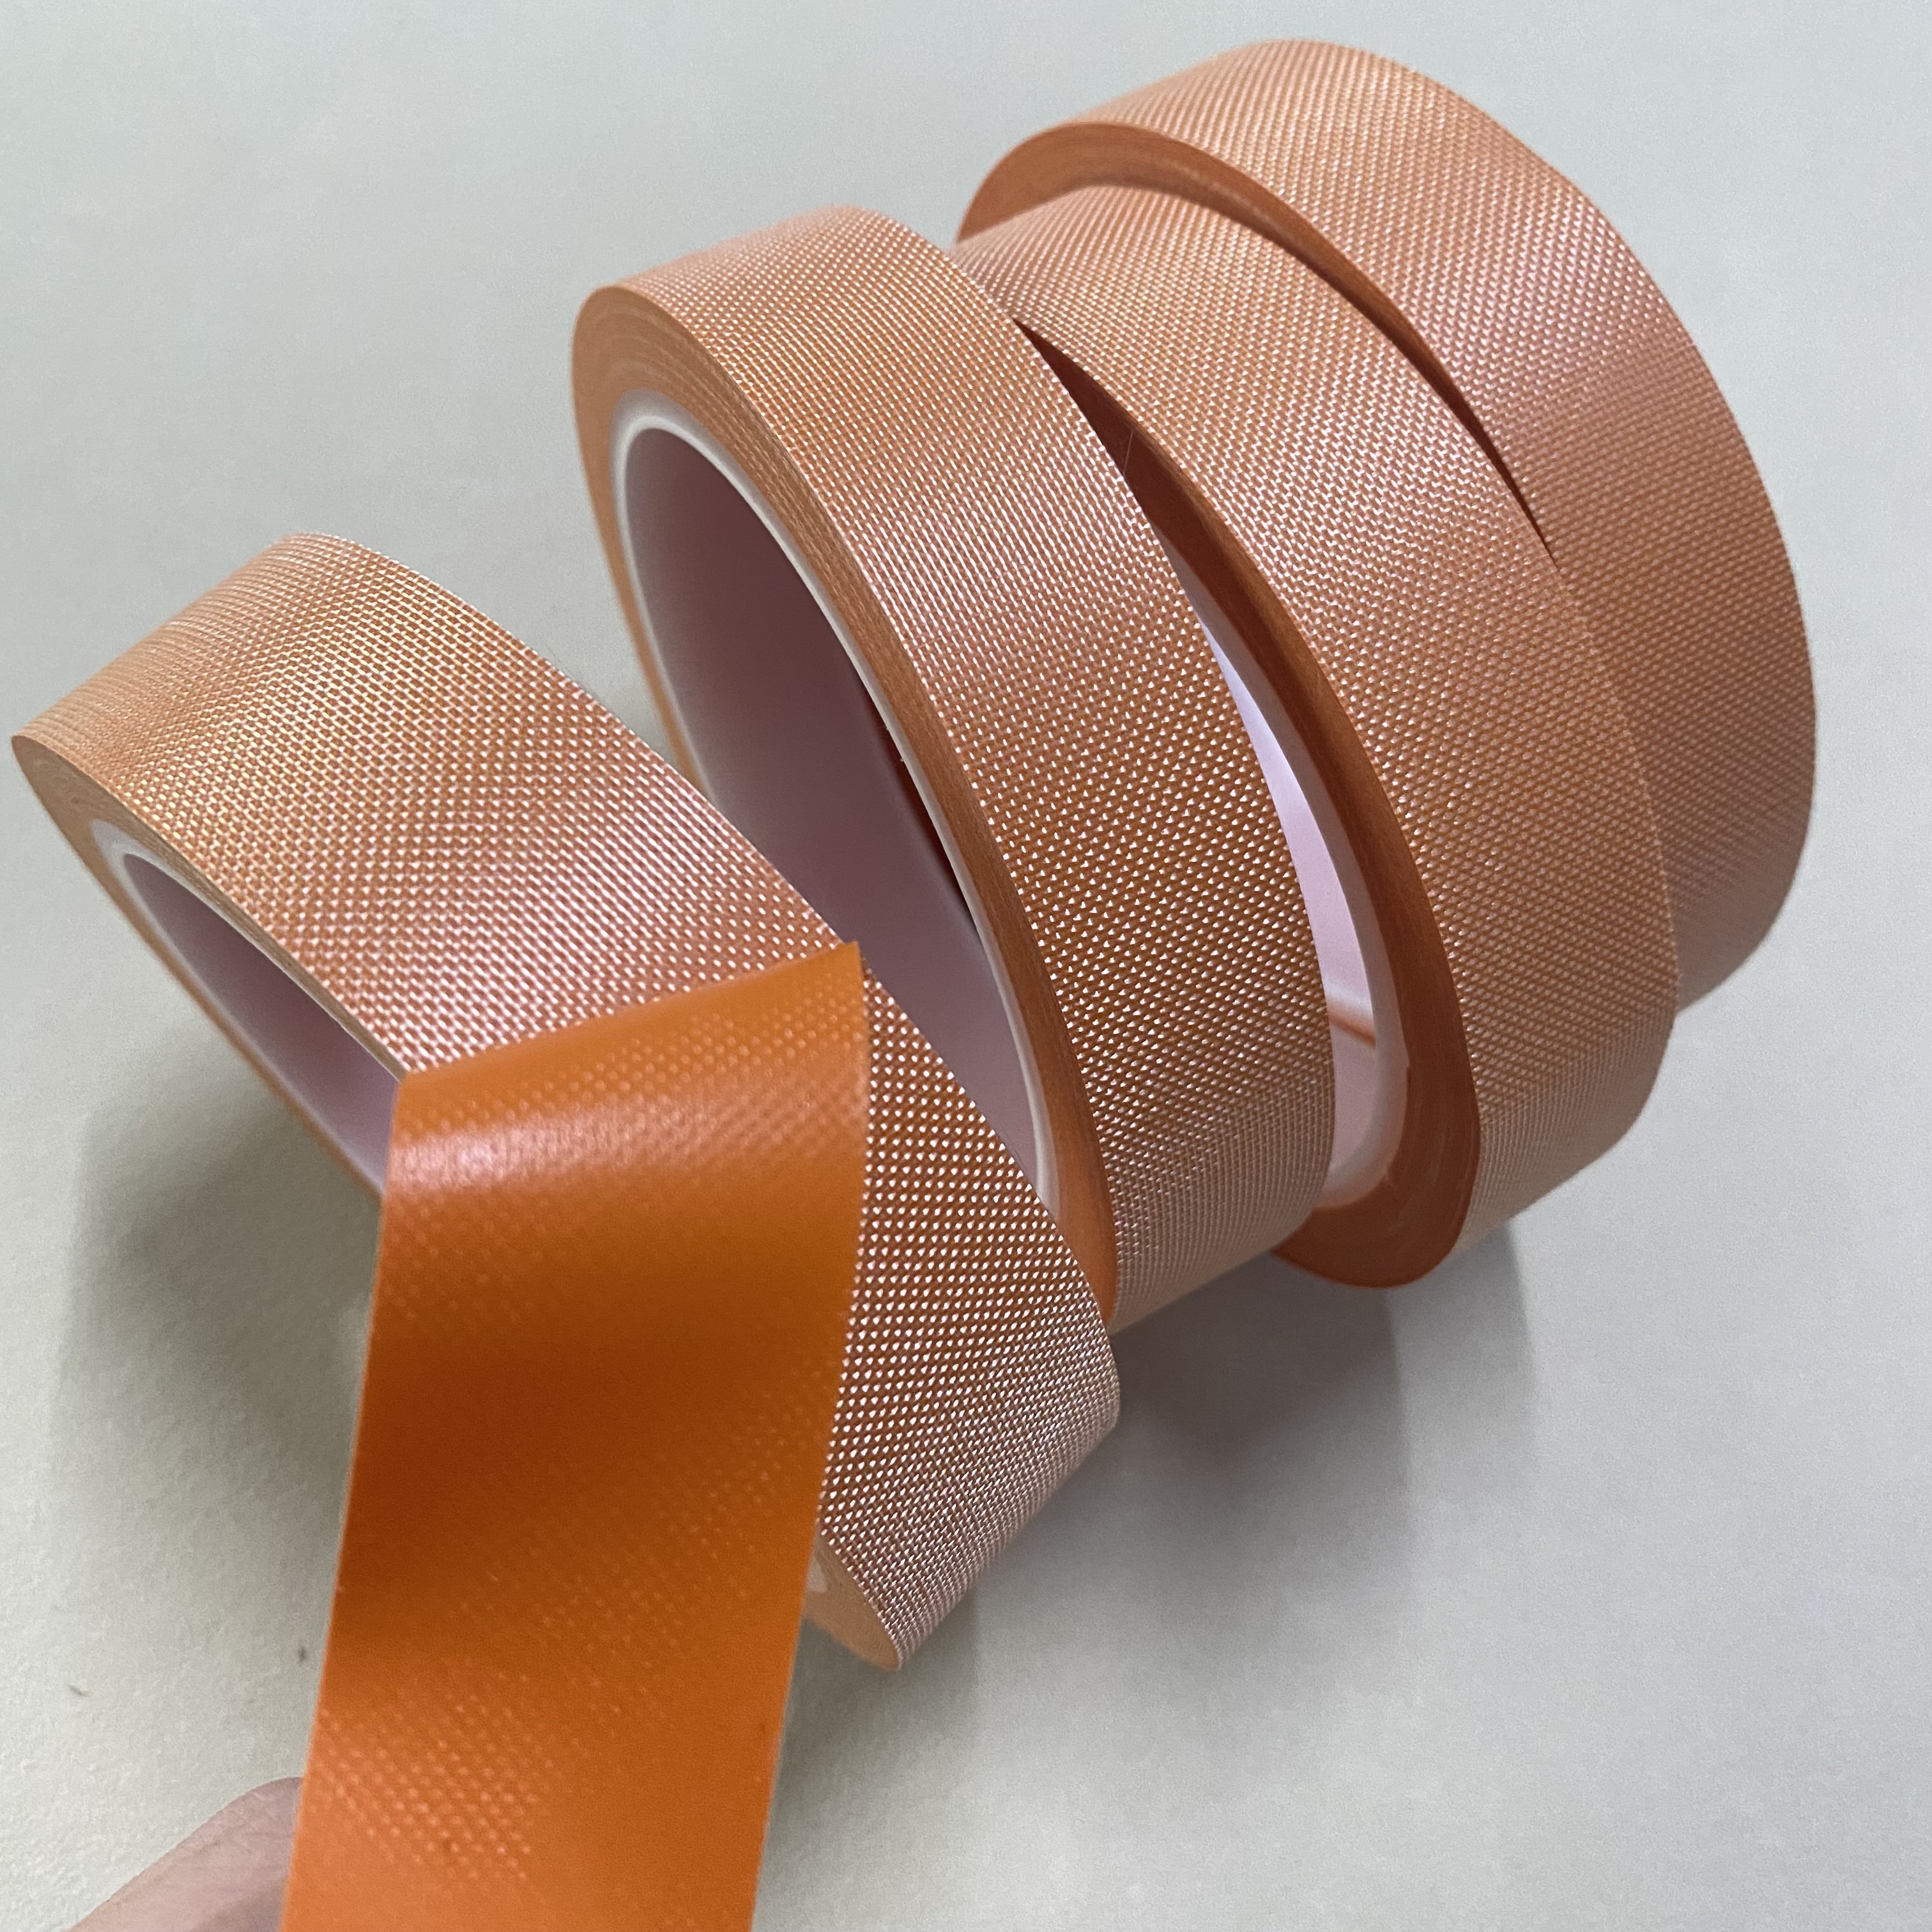 High Temperature Insulation Fire-resistant Silicone Tape Fireproof Fiberglass Tape for Wire And Cable